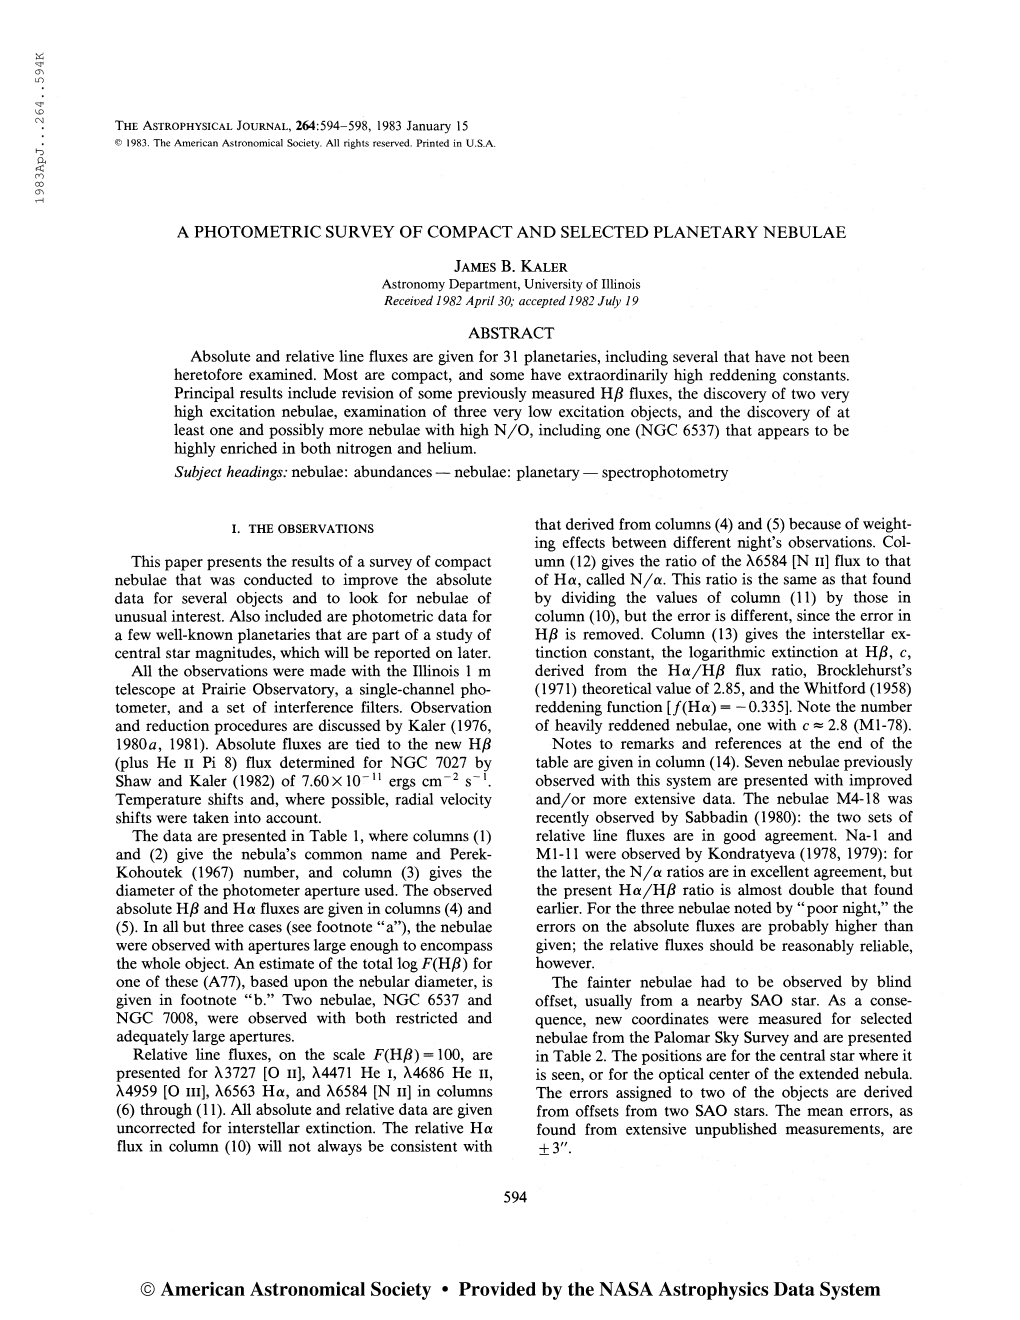 The Astrophysical Journal, 264:594-598, 1983 January 15